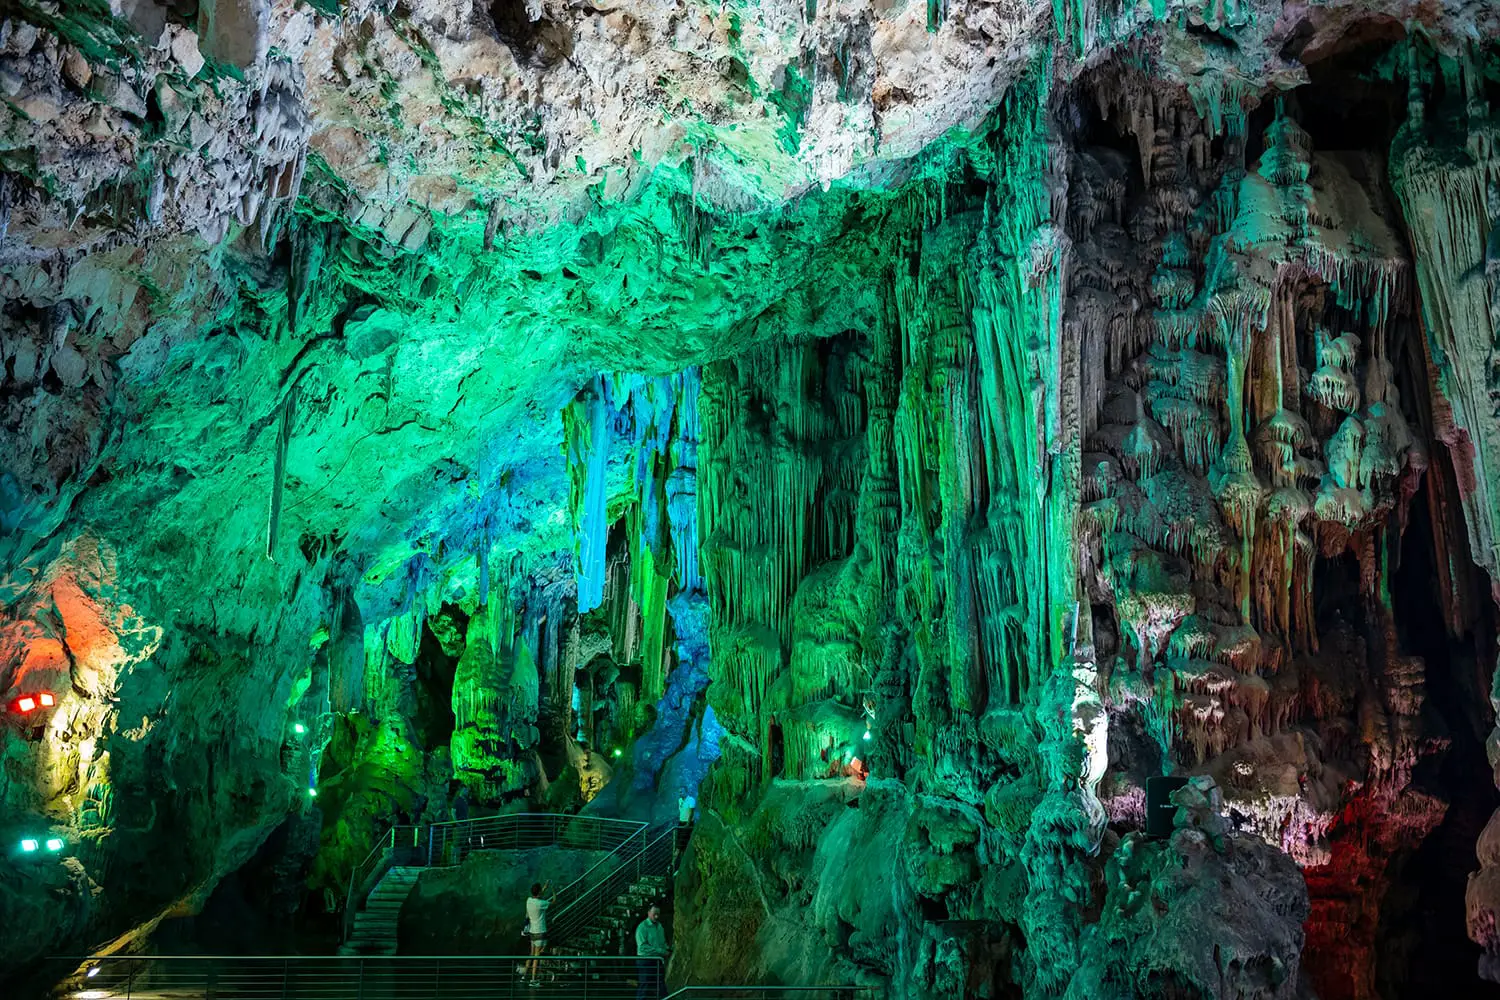 Tourists explore Old St. Michael's Cave, that has been illuminated with colorful LED lighting, located at the Upper Rock Nature Reserve at Gibraltar.